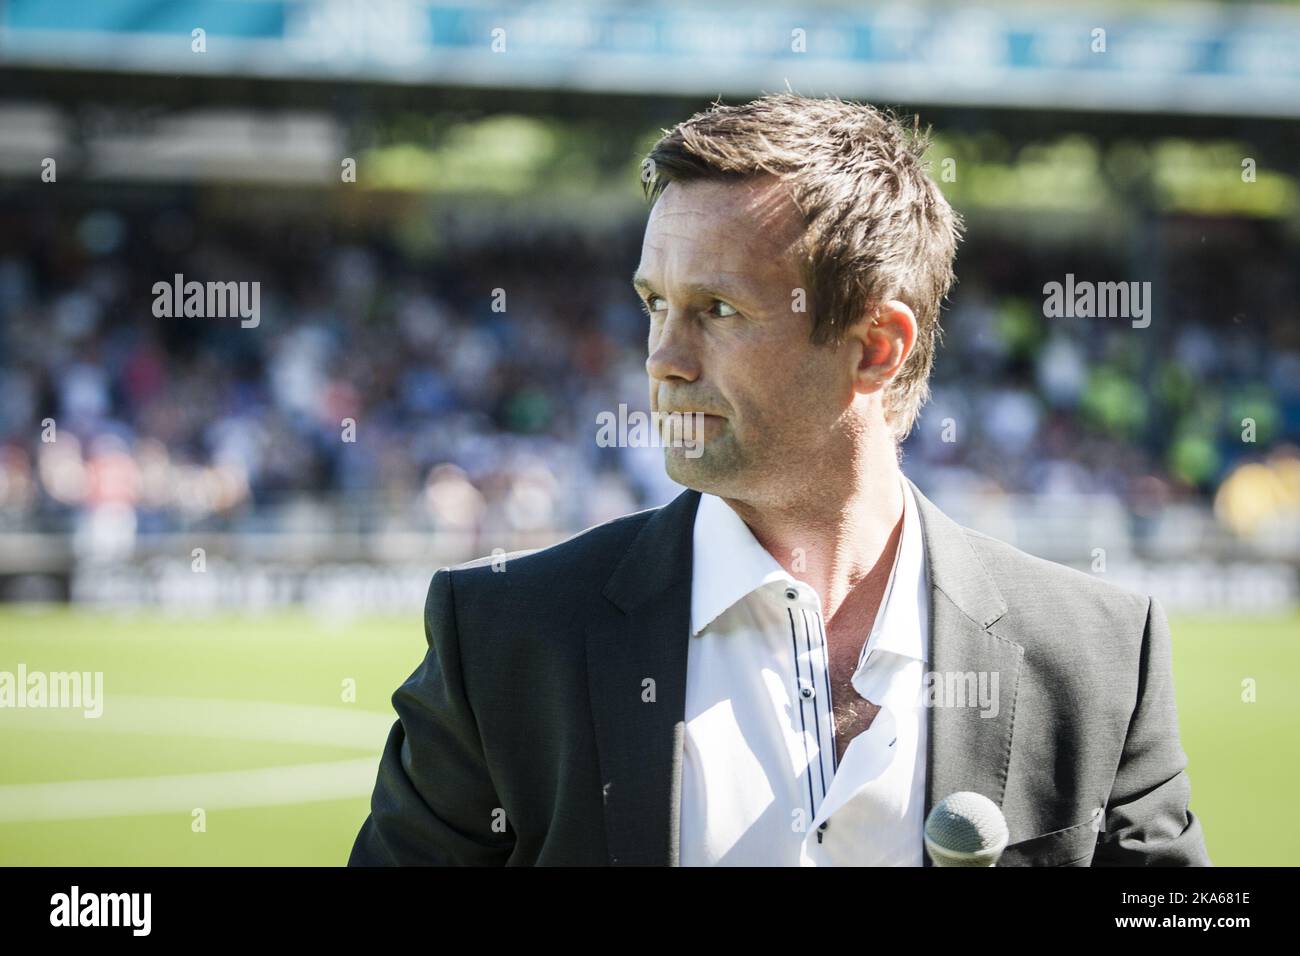 Outgoing manager of Stromsgodset FK and incoming manager of Scottish Premiership club Celtic Ronny Deila reacts after speaking to the supporters after half time of the match between Stomsgodset and Haugesund in the Norwegian top football league in Drammen, 9 June 2014. Photo by Audun Braastad, NTB scanpix Stock Photo